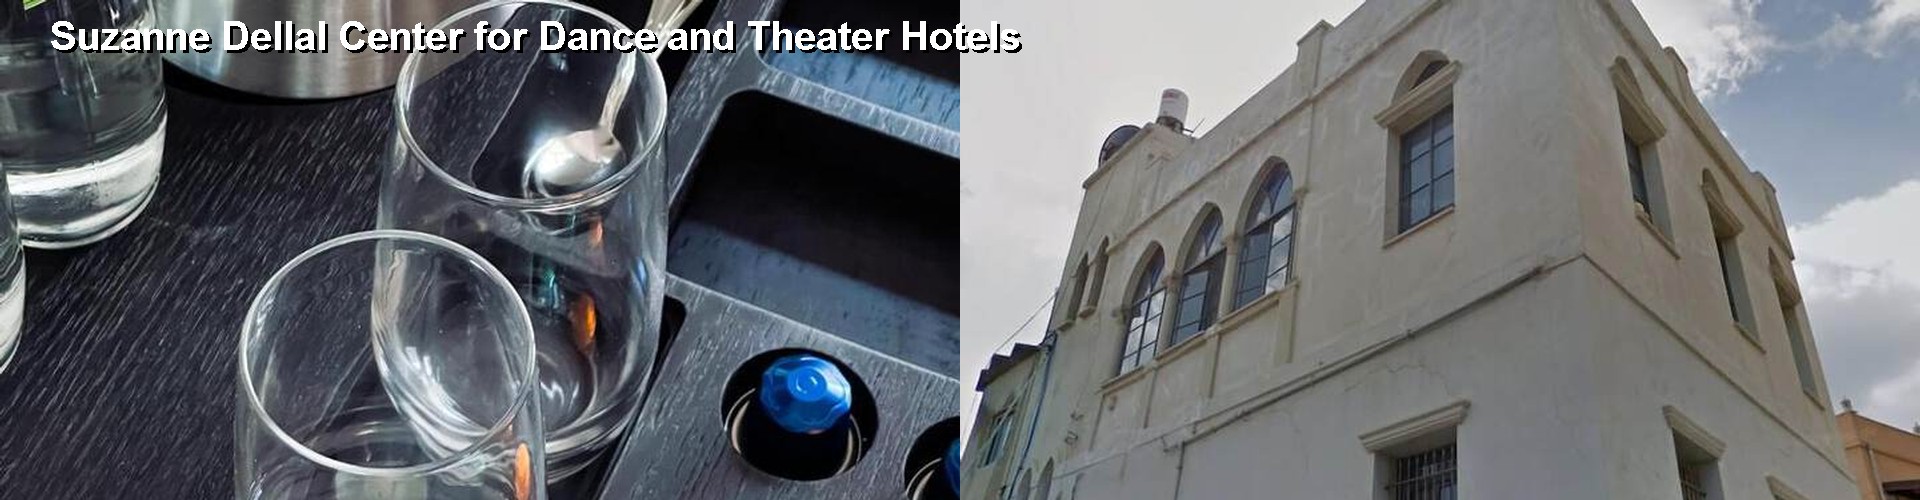 5 Best Hotels near Suzanne Dellal Center for Dance and Theater